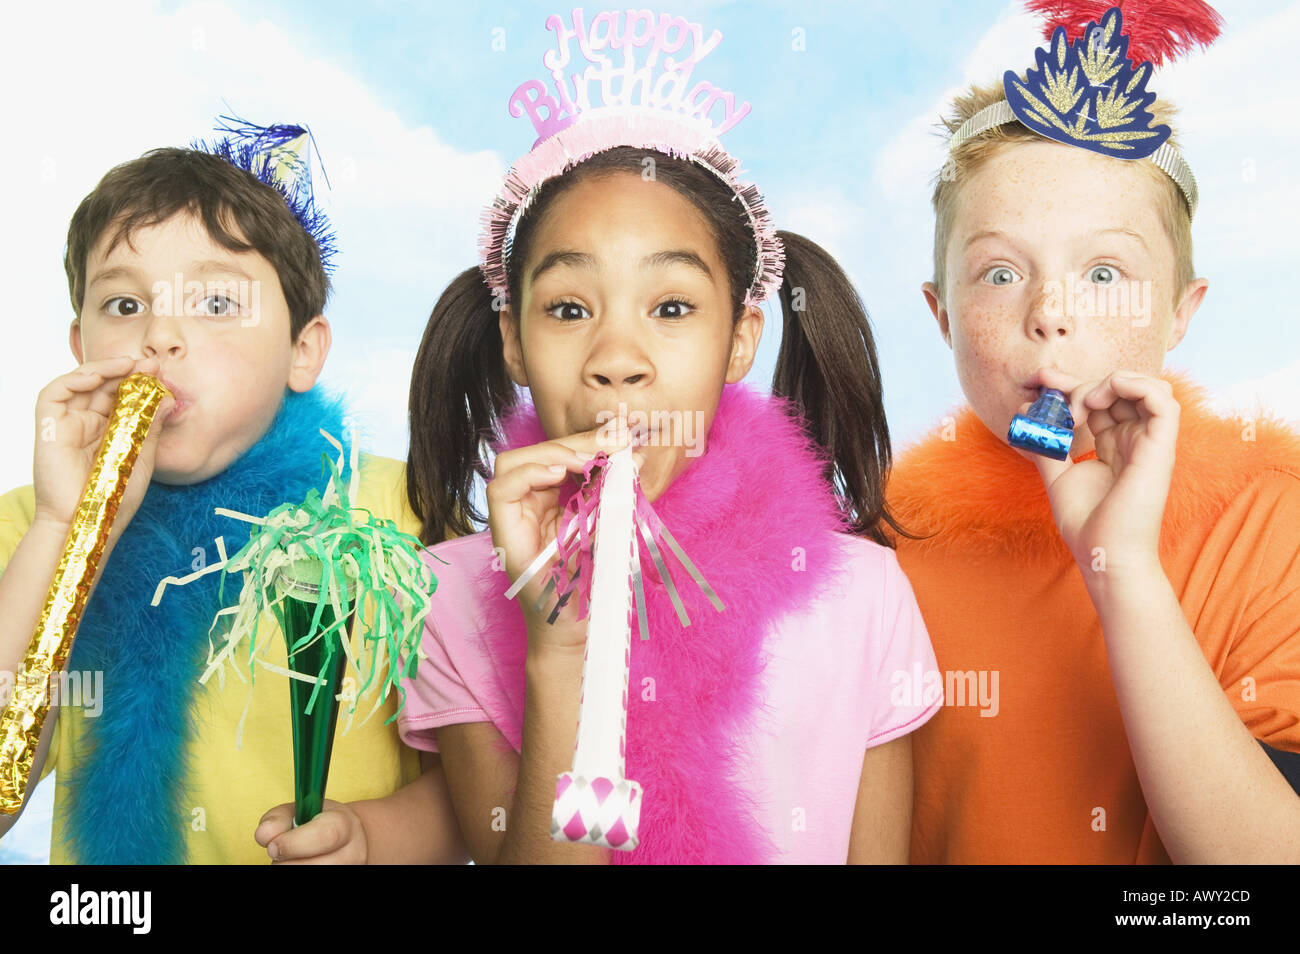 Boys and girl in party hats Stock Photo